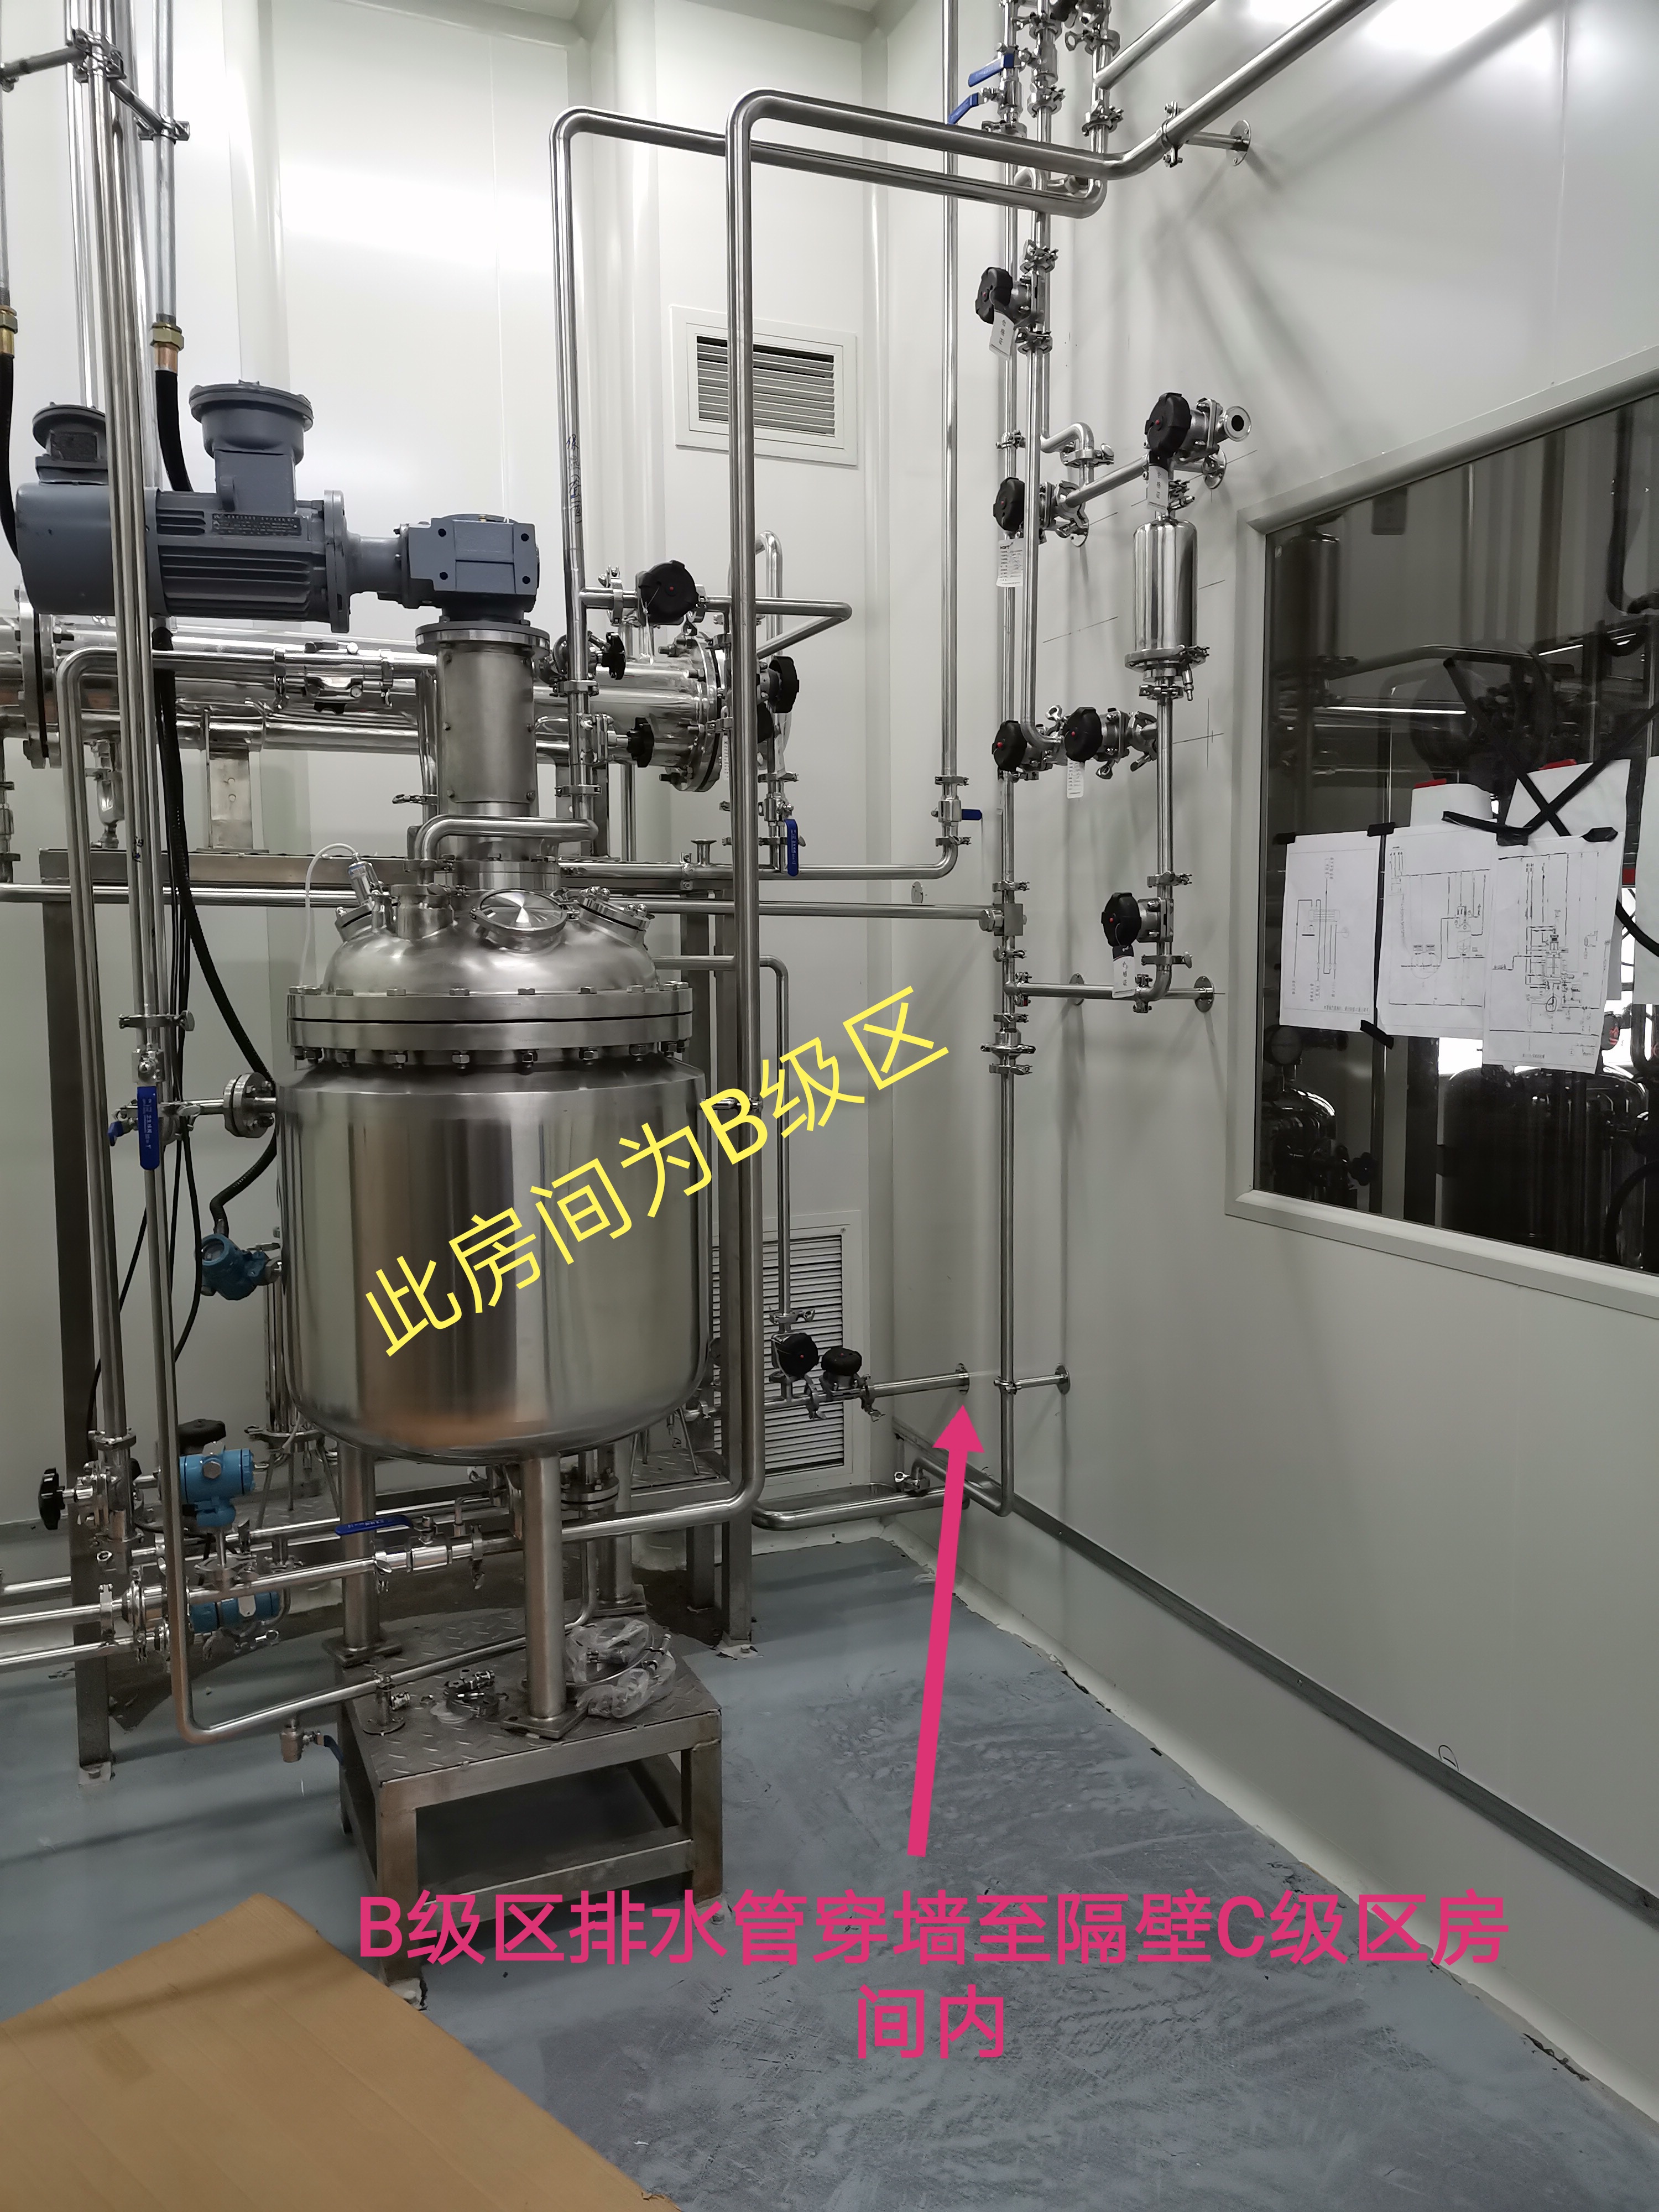 UPGRADING AND REVAMPING OF CHEMICAL SYNTHESIS LINE